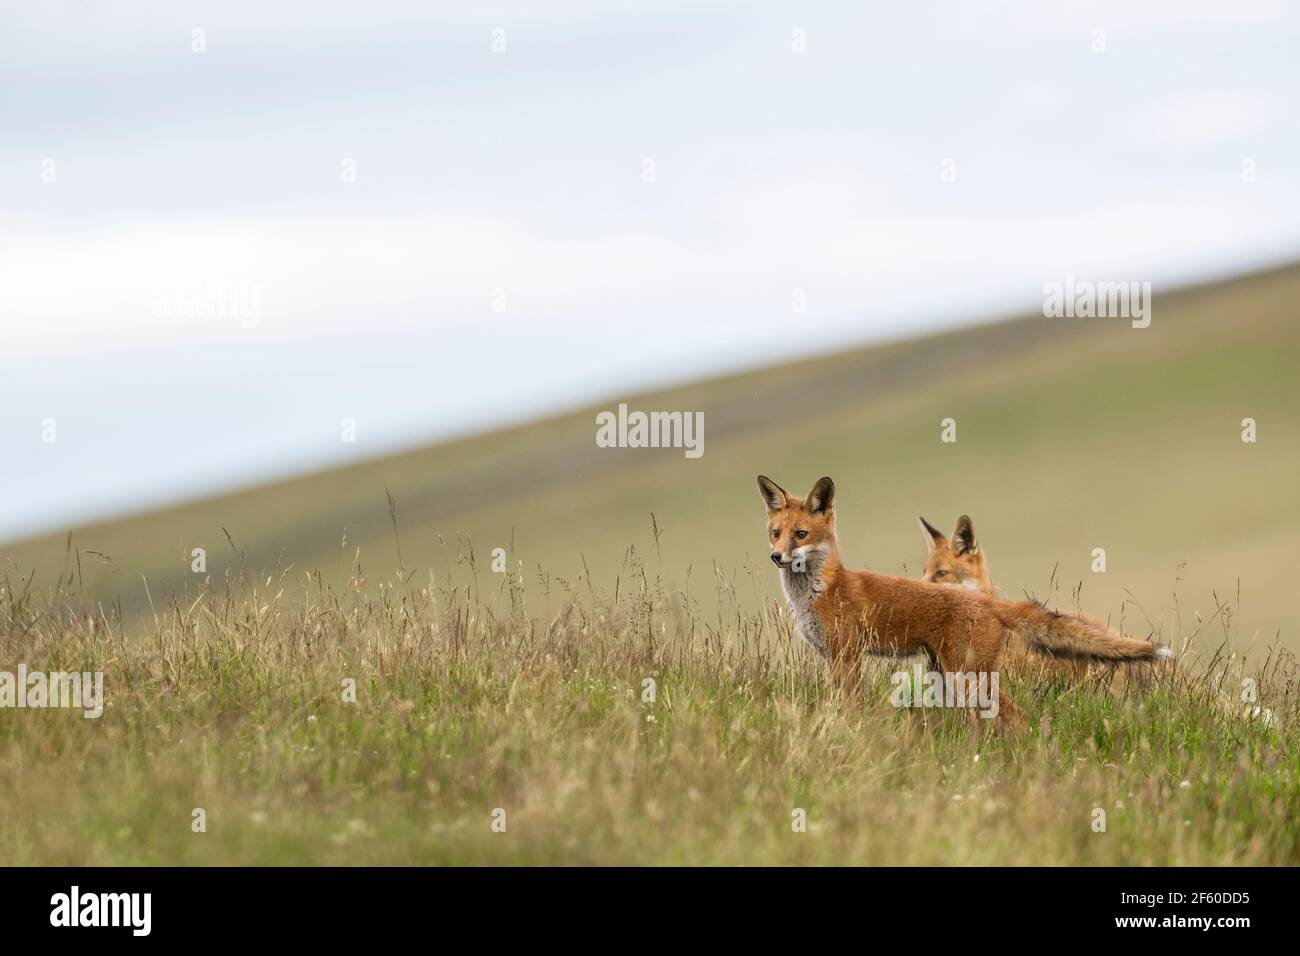 Volpi rosse (Vulpes vulpes), parco nazionale Northumberland, Regno Unito, Foto Stock